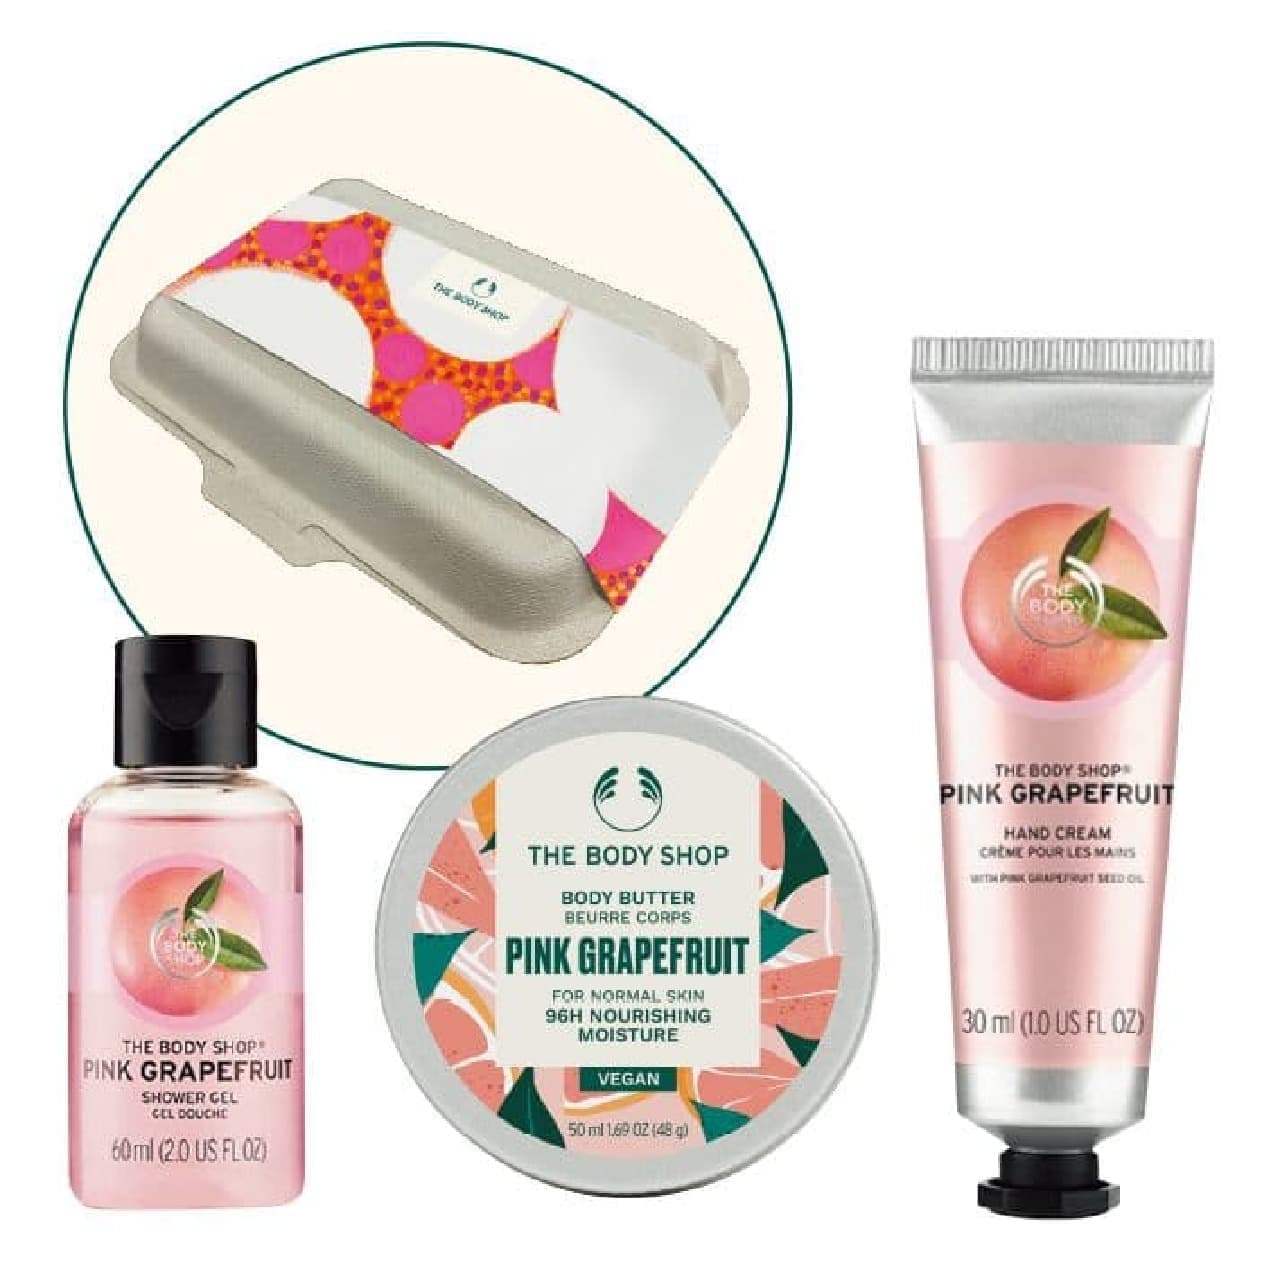 The Body Shop "Japanese Cherry Blossom" Limited Edition Label "Growing Cherry Blossom